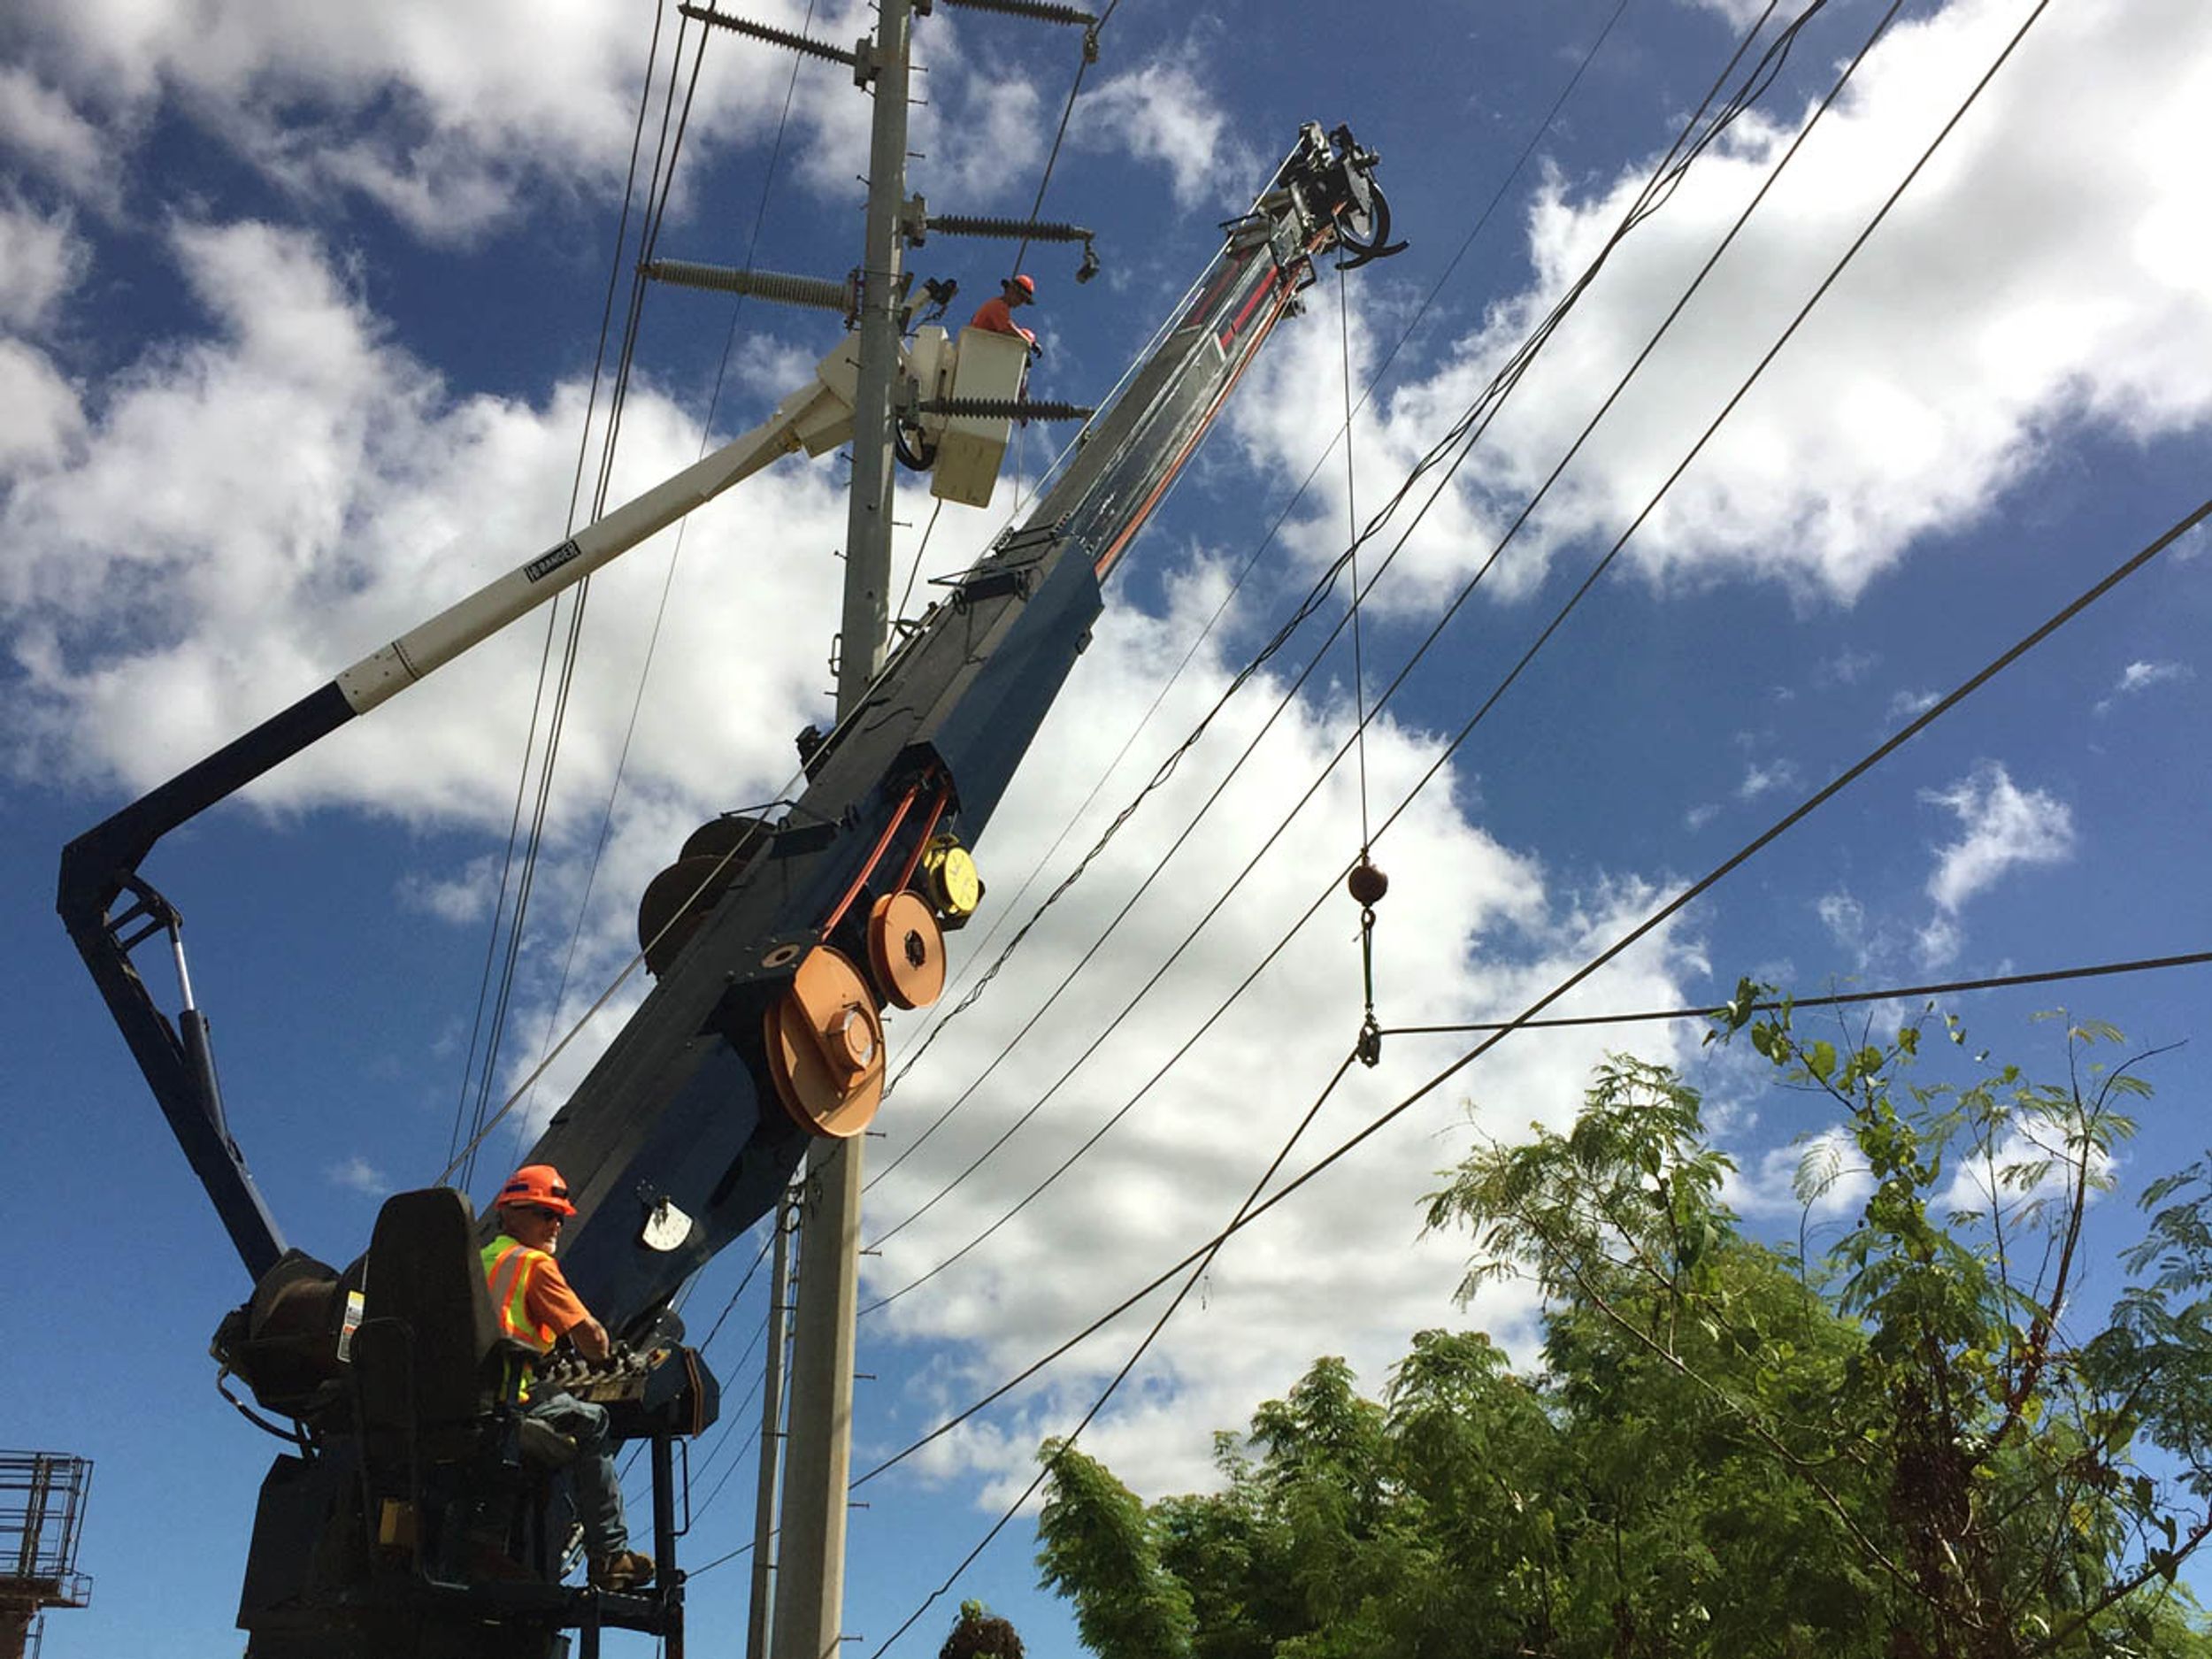 A soon-to-be-released plan for restoring Puerto Rico's grid is likely to feature micro-grids and distributed generation